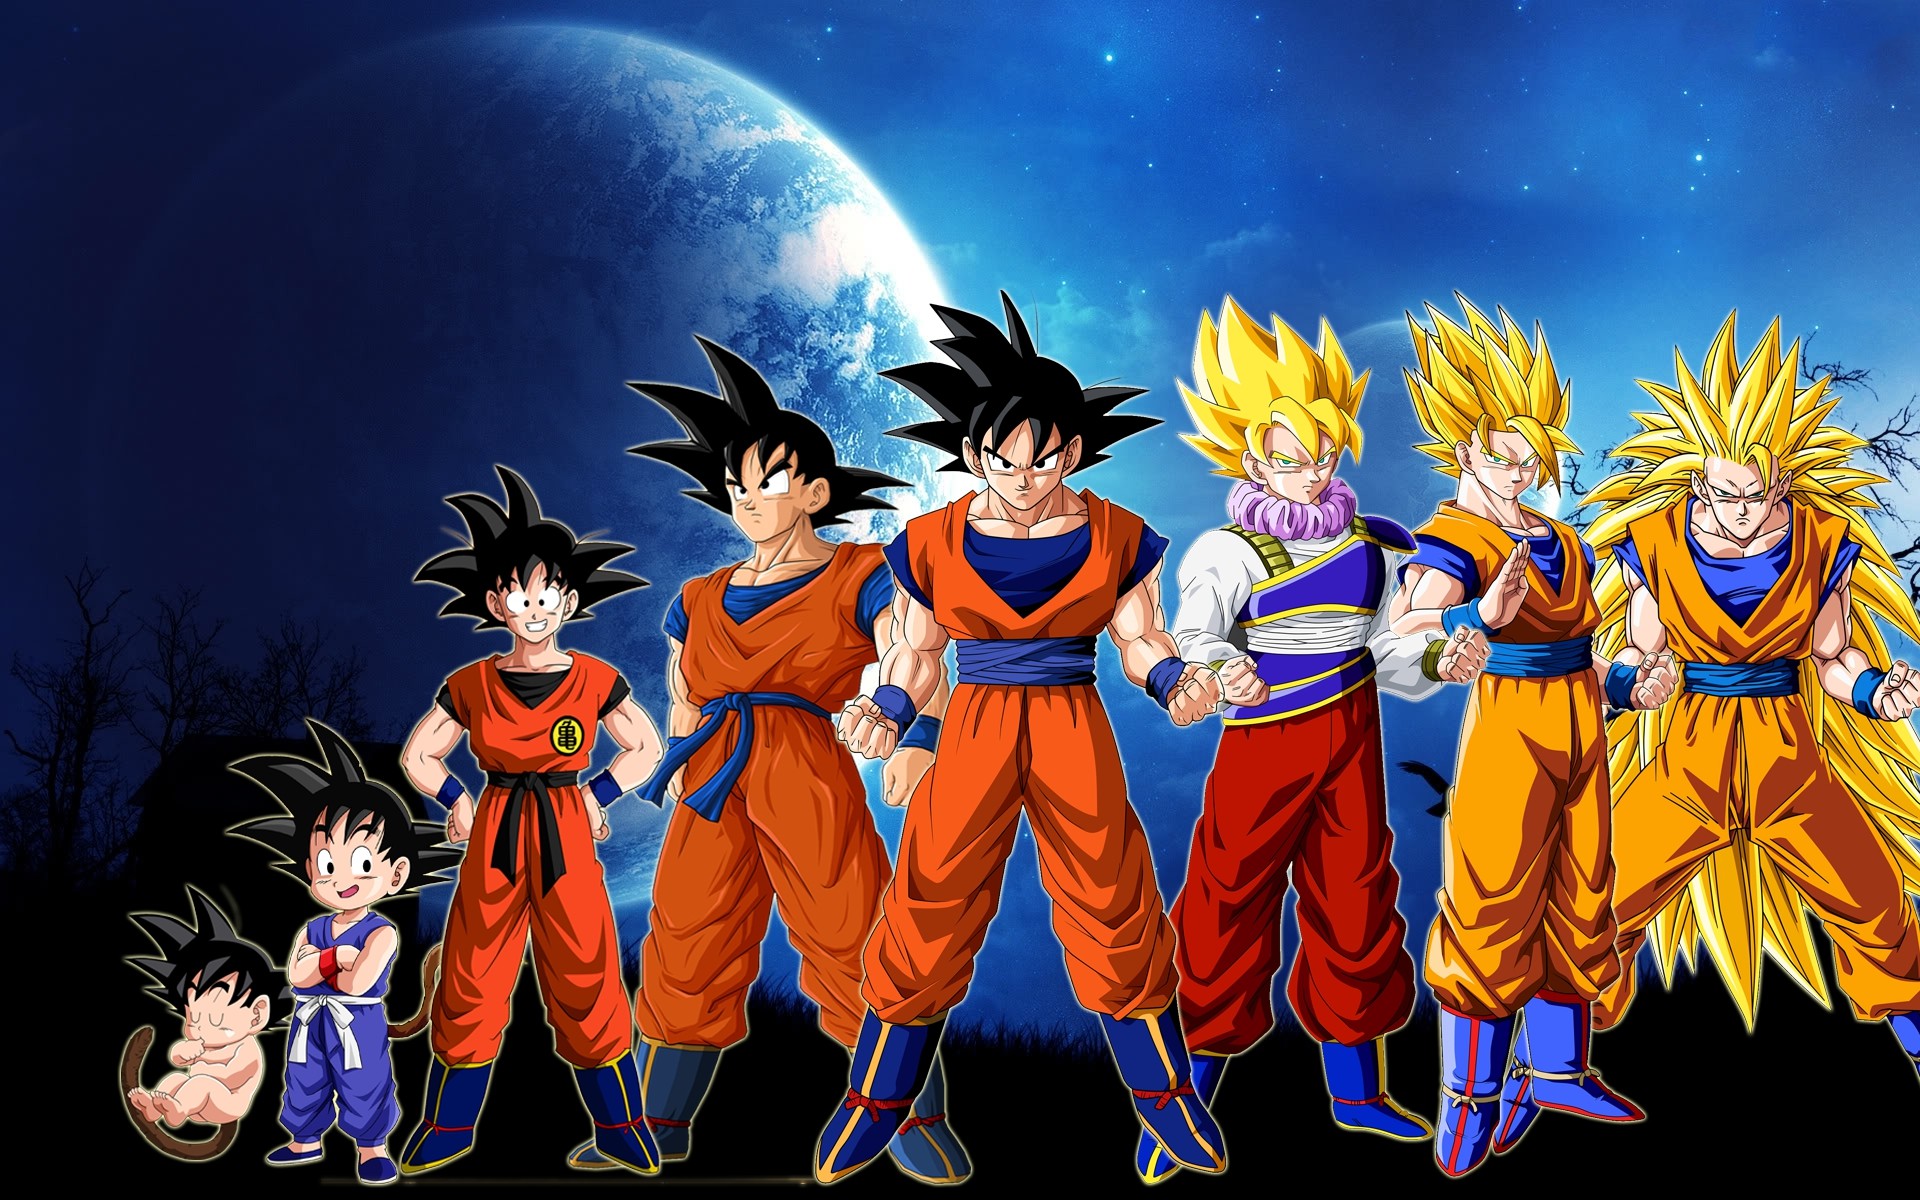 Related Wallpapers from Pokemon Backgrounds. Dragonball z